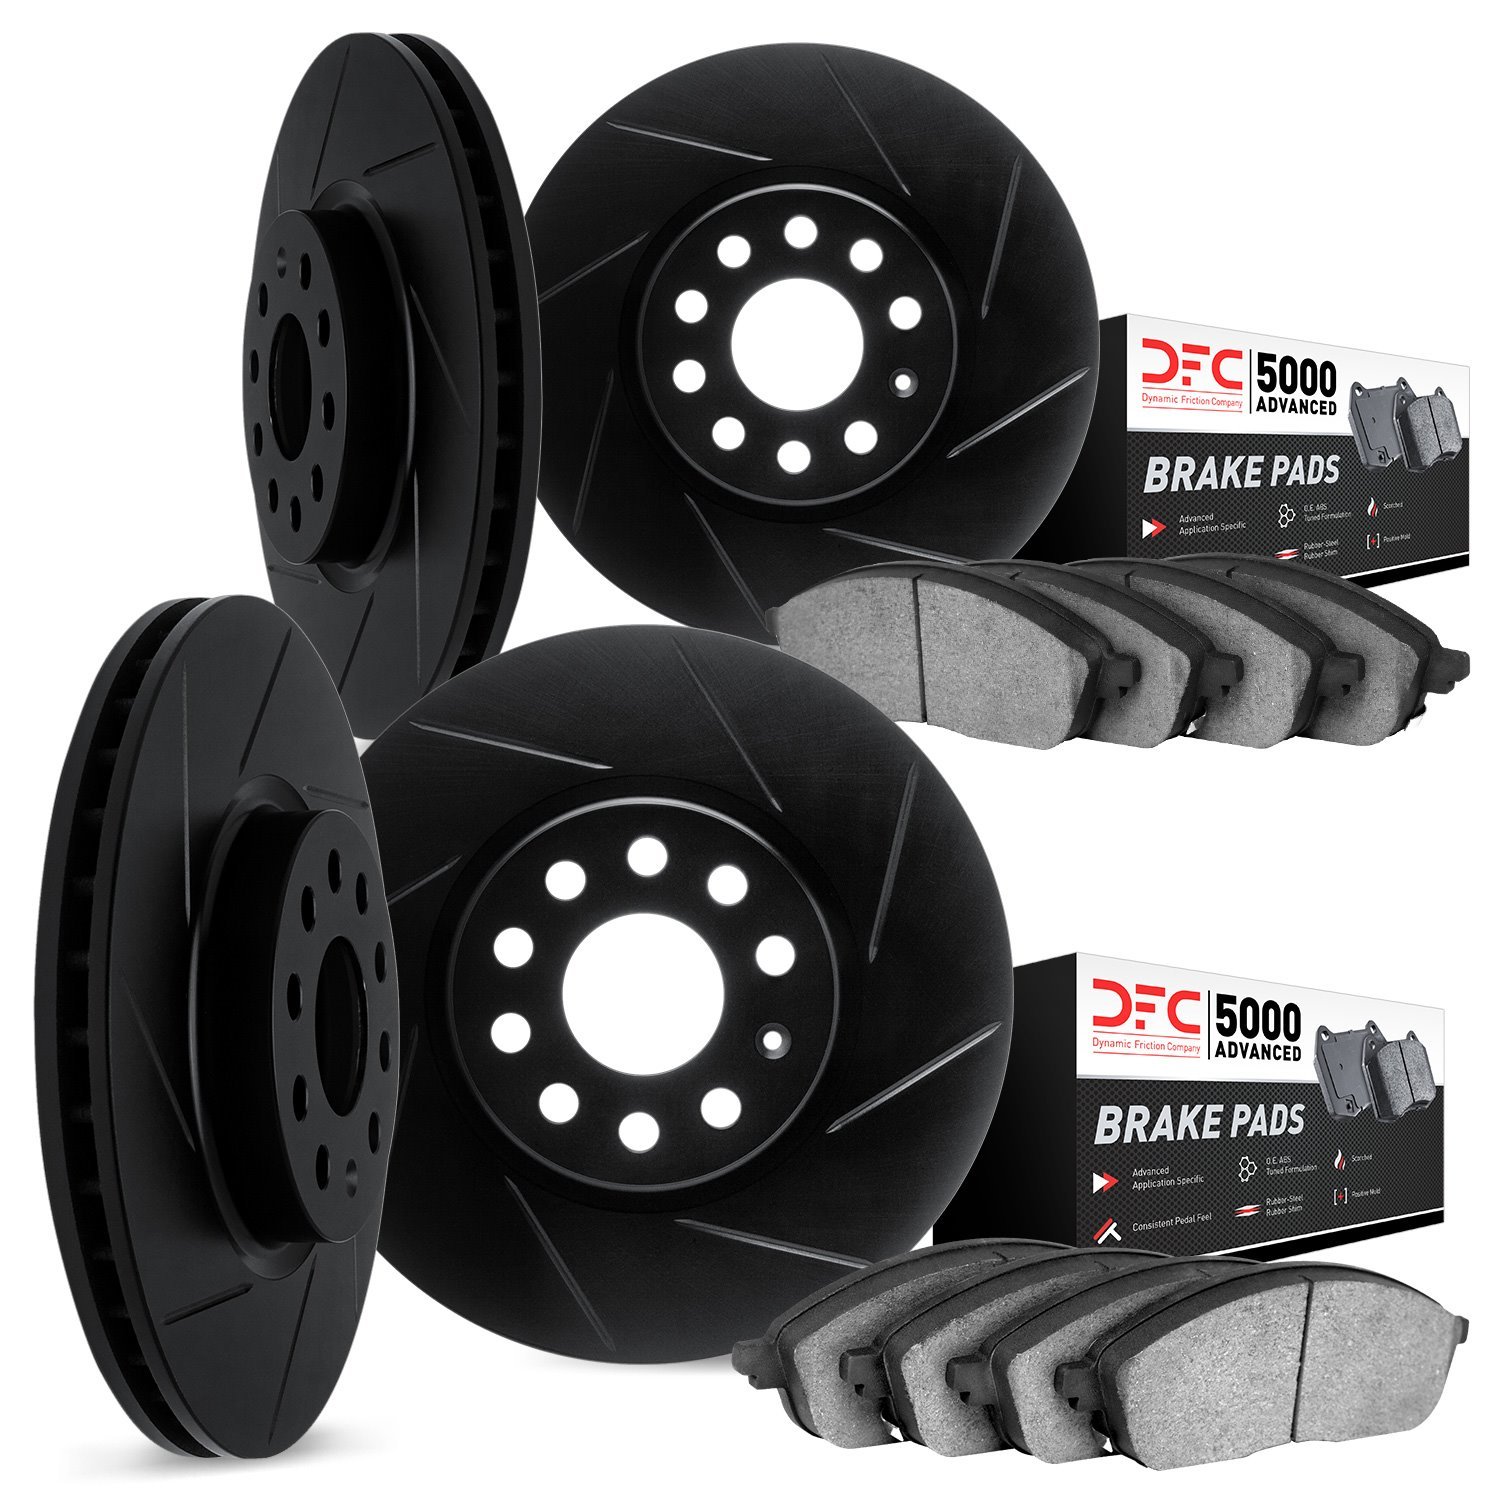 3514-31086 Slotted Brake Rotors w/5000 Advanced Brake Pads Kit & Hardware [Black], 2015-2018 BMW, Position: Front and Rear